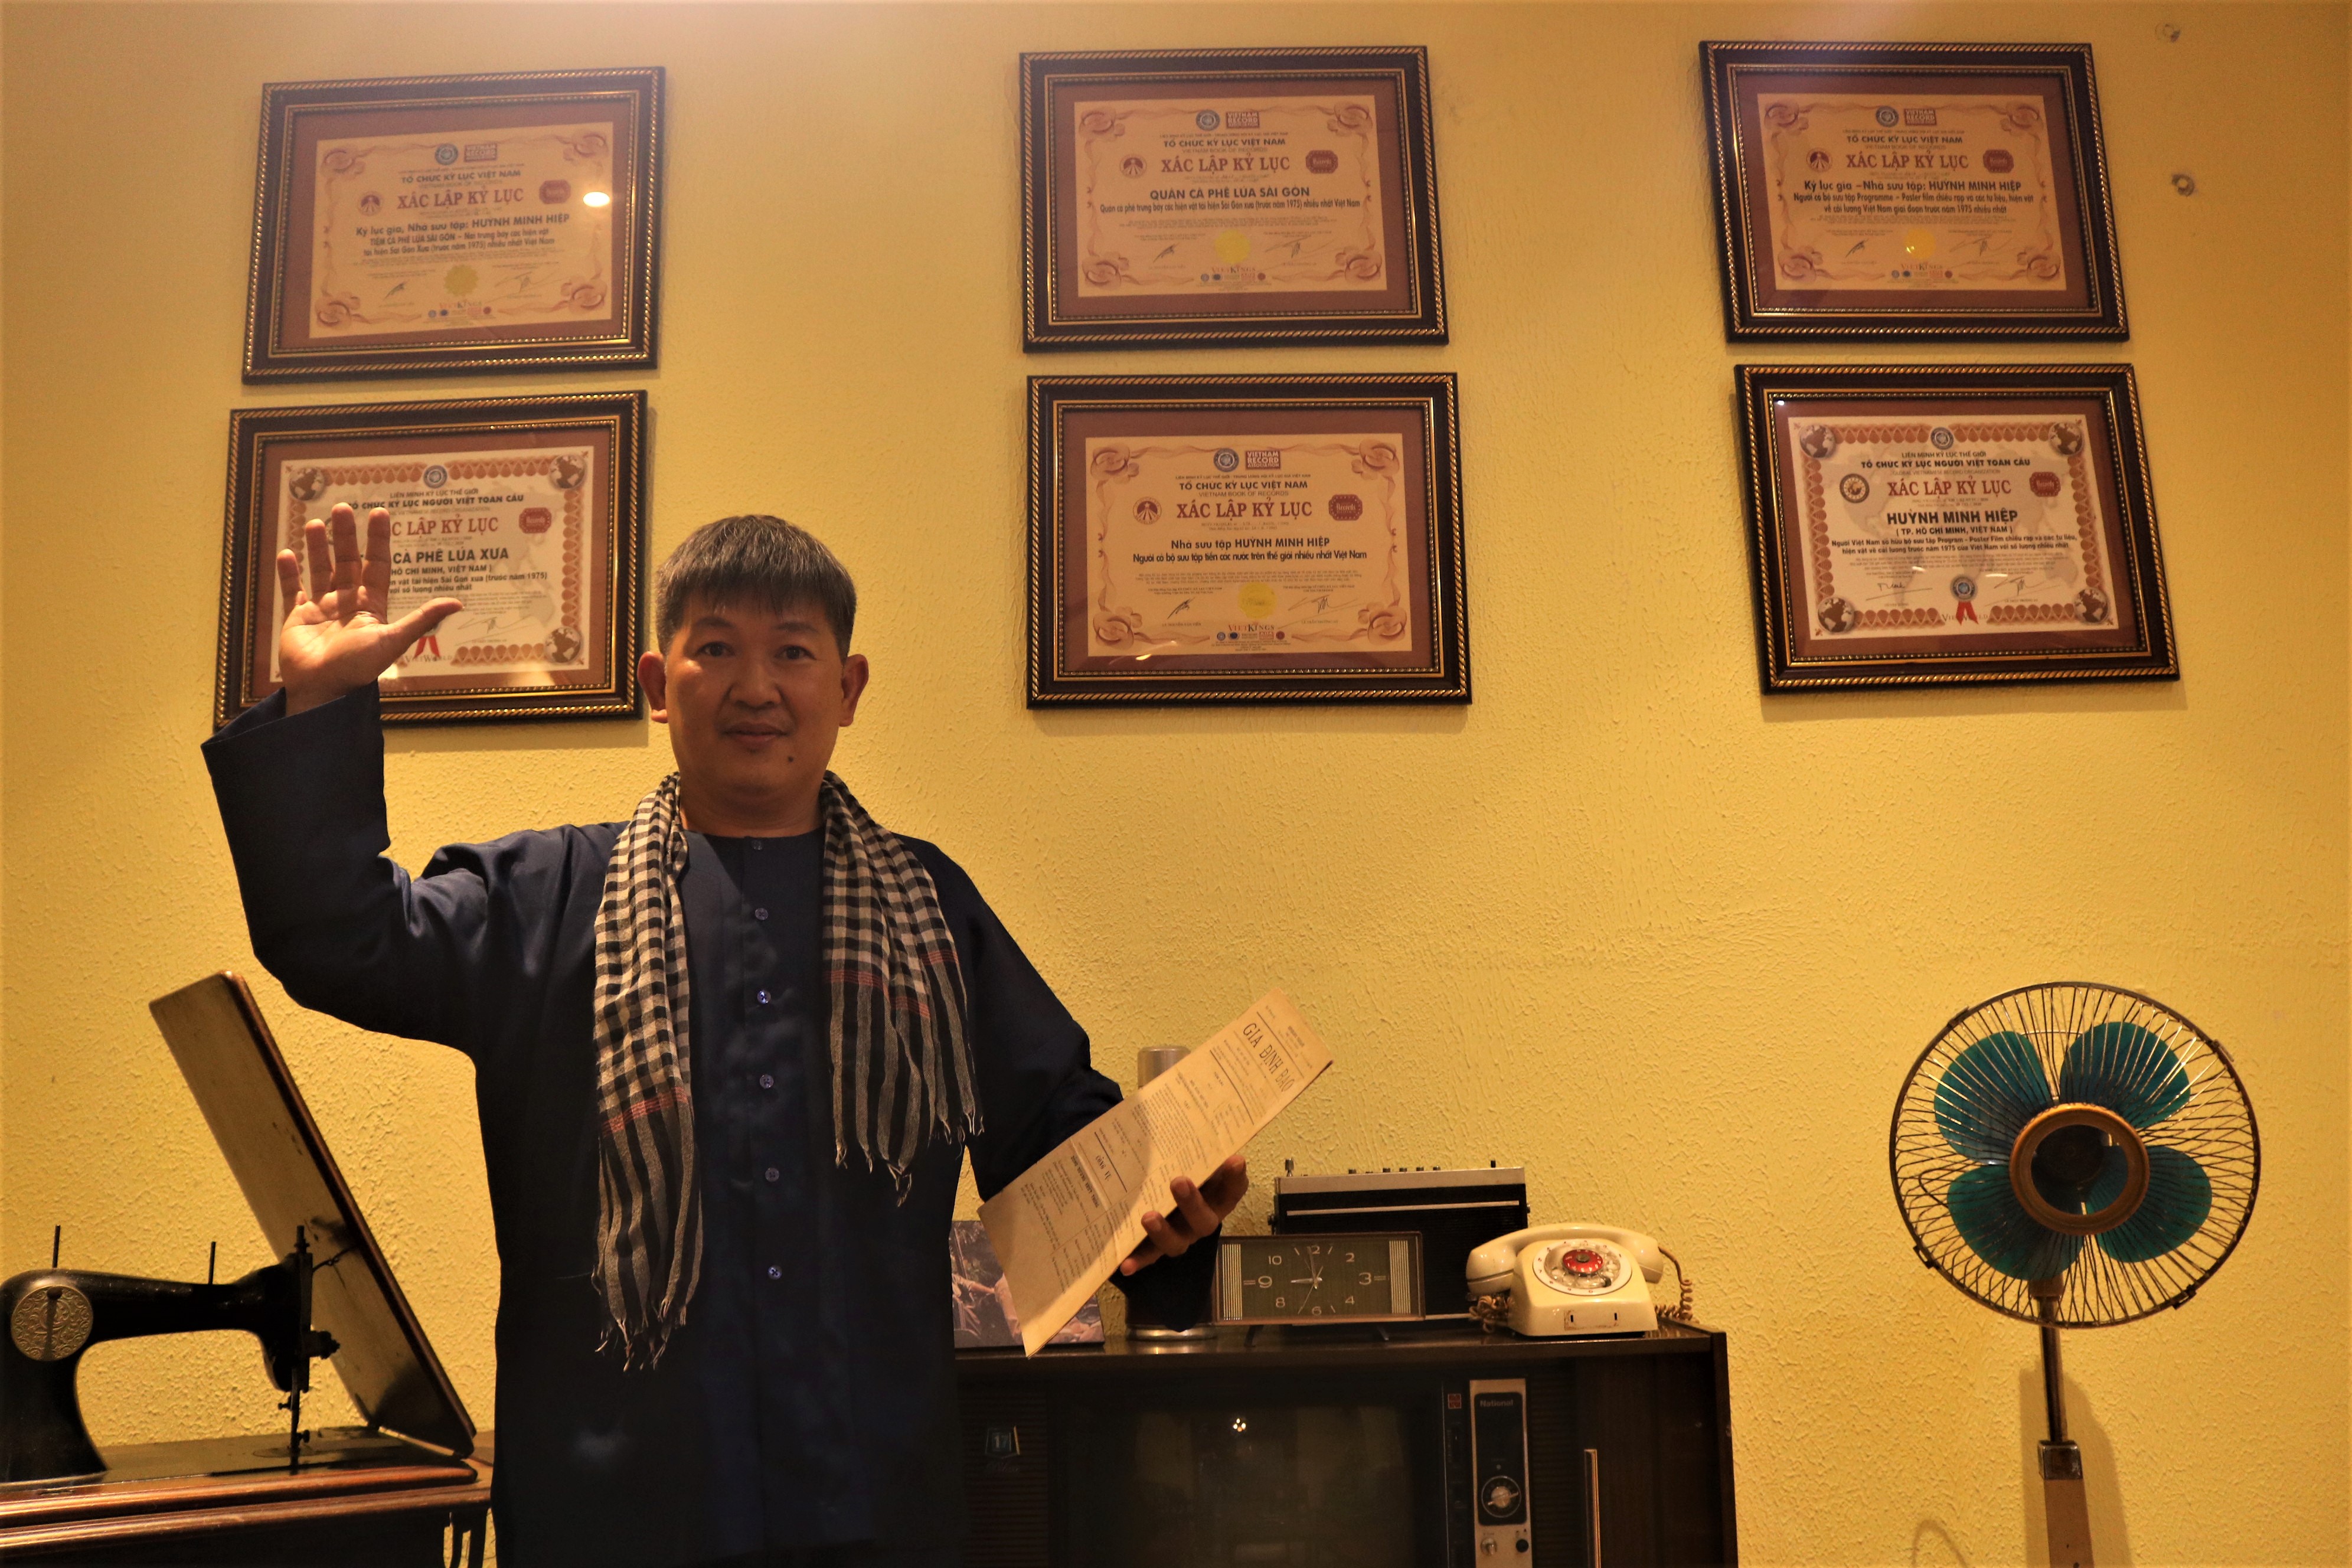 Huynh Minh Hiep poses with certificates recognizing the depth of his antique collection at Lua Sai Gon café in Phu Nhuan District, Ho Chi Minh City. Photo: Hoang An / Tuoi Tre News